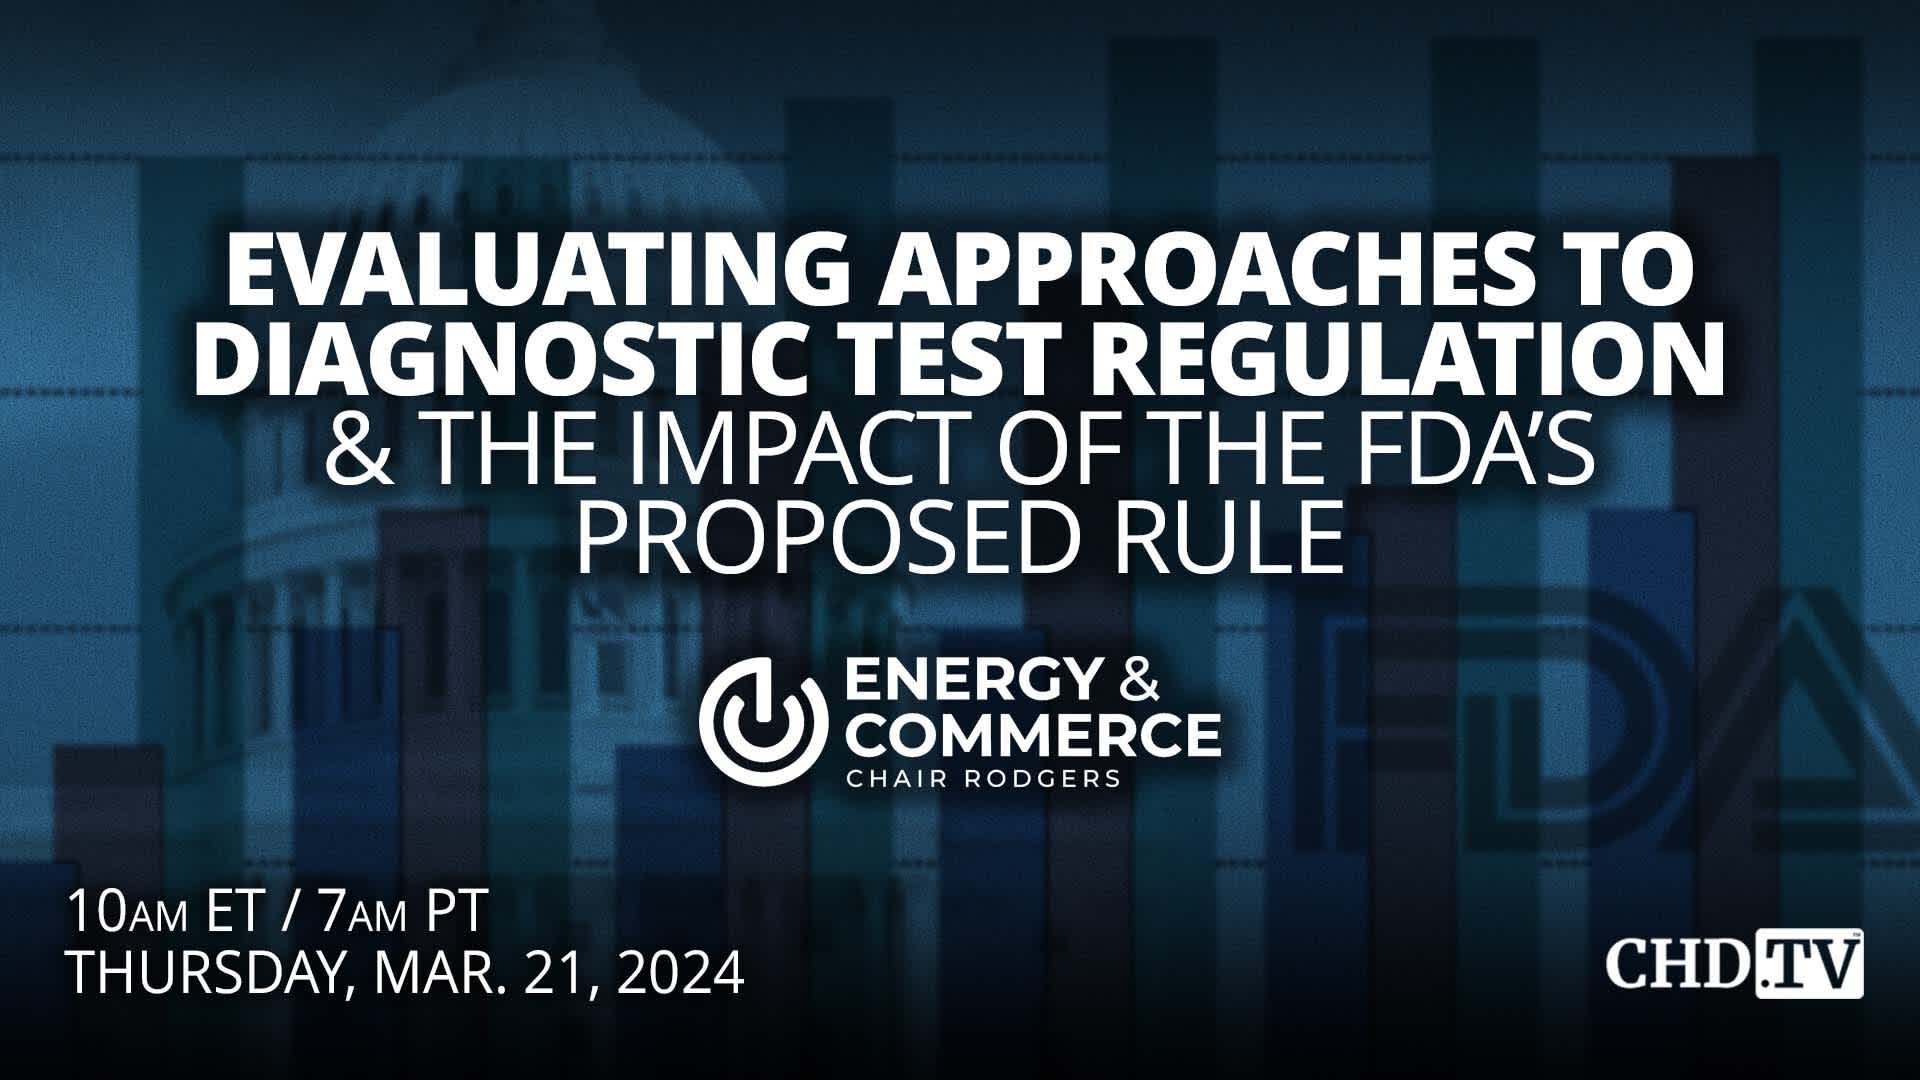 Evaluating Approaches to Diagnostic Test Regulation & the Impact of the FDA’s Proposed Rule | Mar. 21